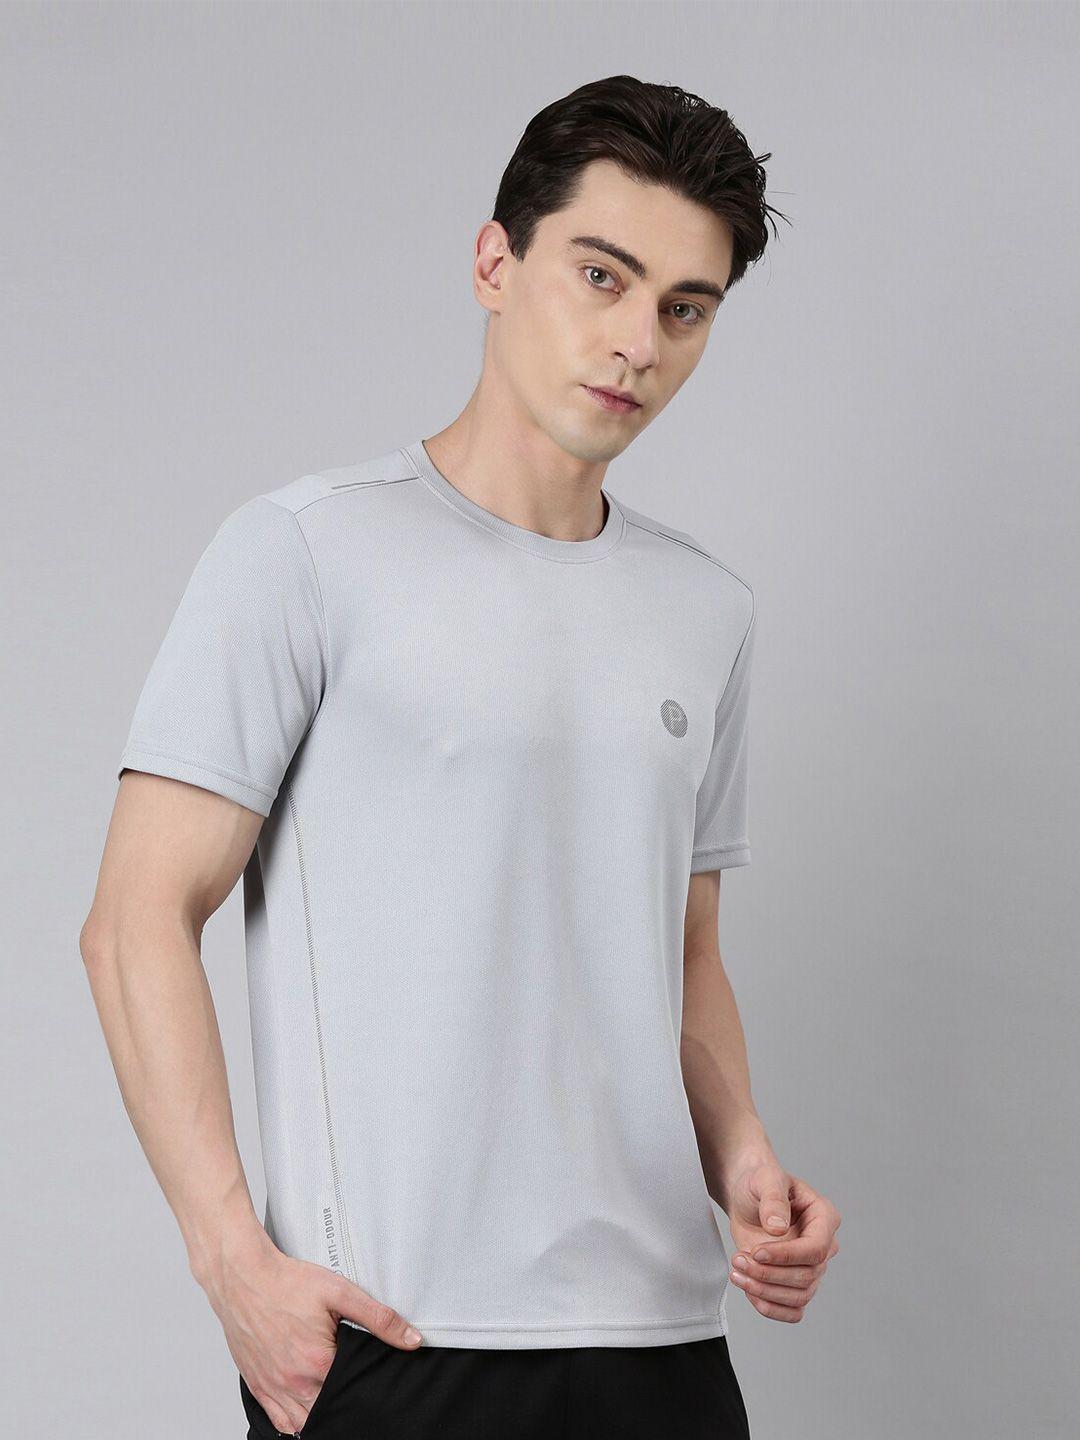 Pepe Jeans Men Round Neck Training Or Gym T-shirt